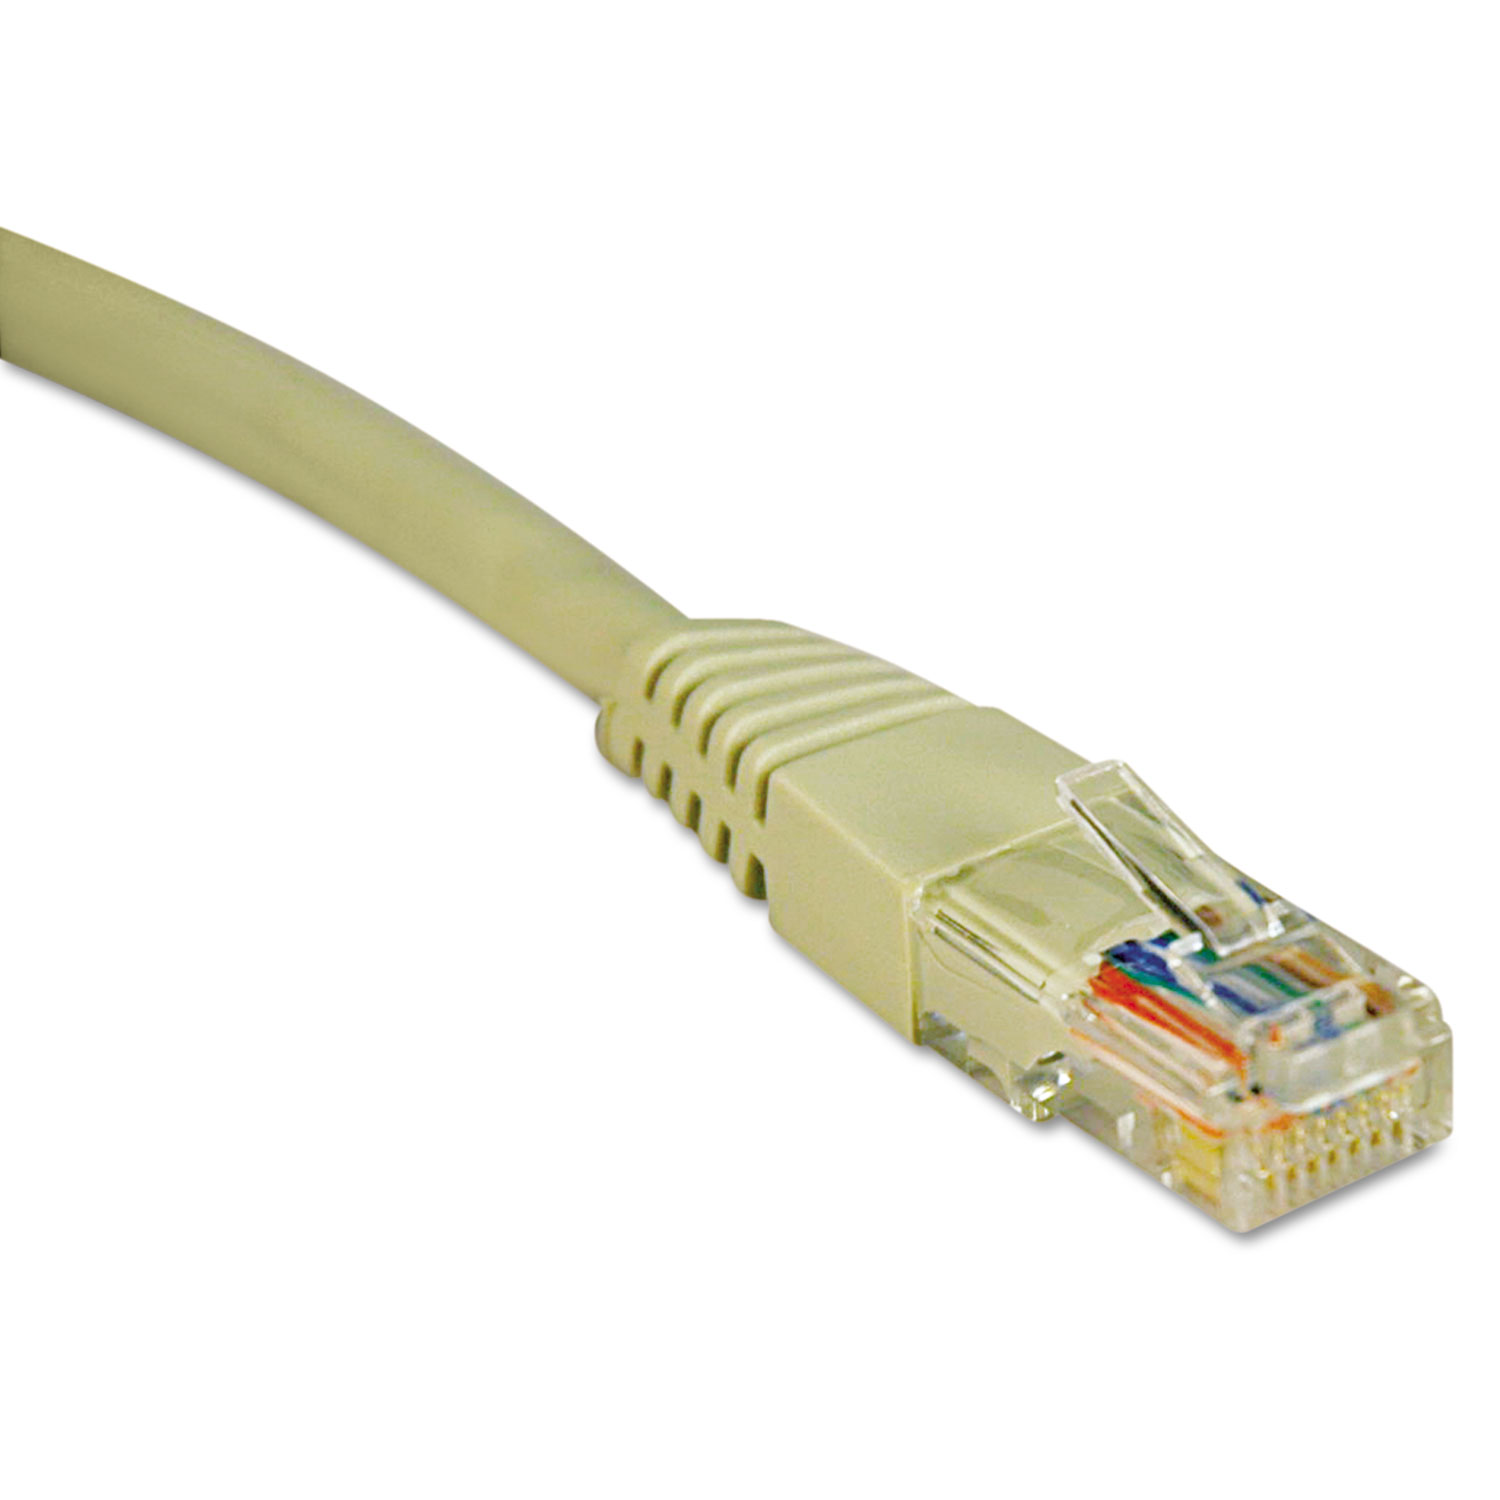  Tripp Lite N002-025-GY Cat5e 350MHz Molded Patch Cable, RJ45 (M/M), 25 ft., Gray (TRPN002025GY) 